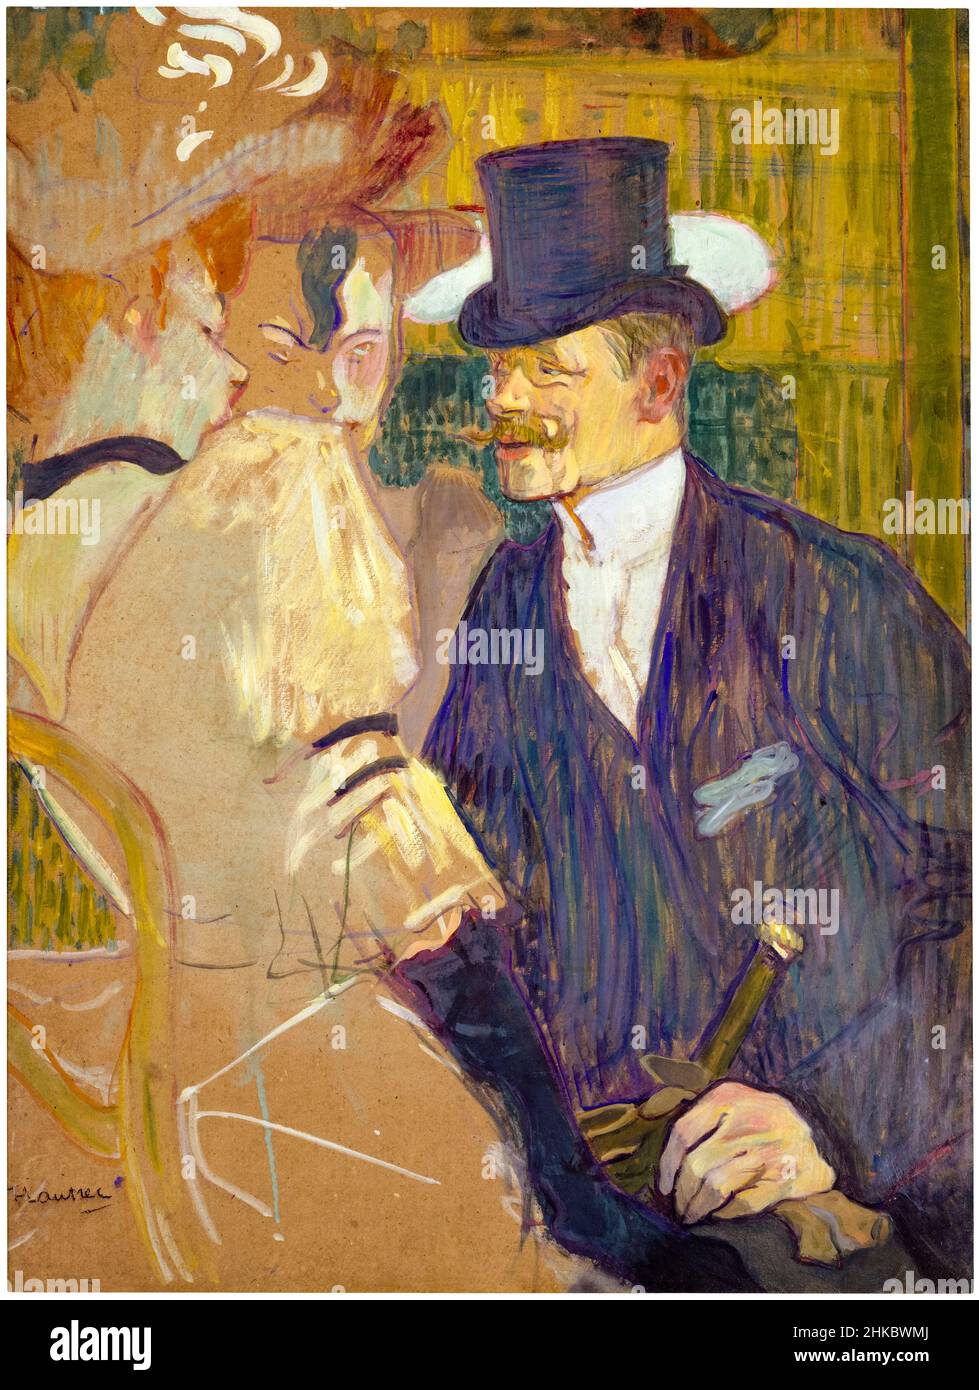 The Englishman at the Moulin Rouge (William Tom Warrener, 1861-1934), painting by Henri de Toulouse-Lautrec, 1892 Stock Photo